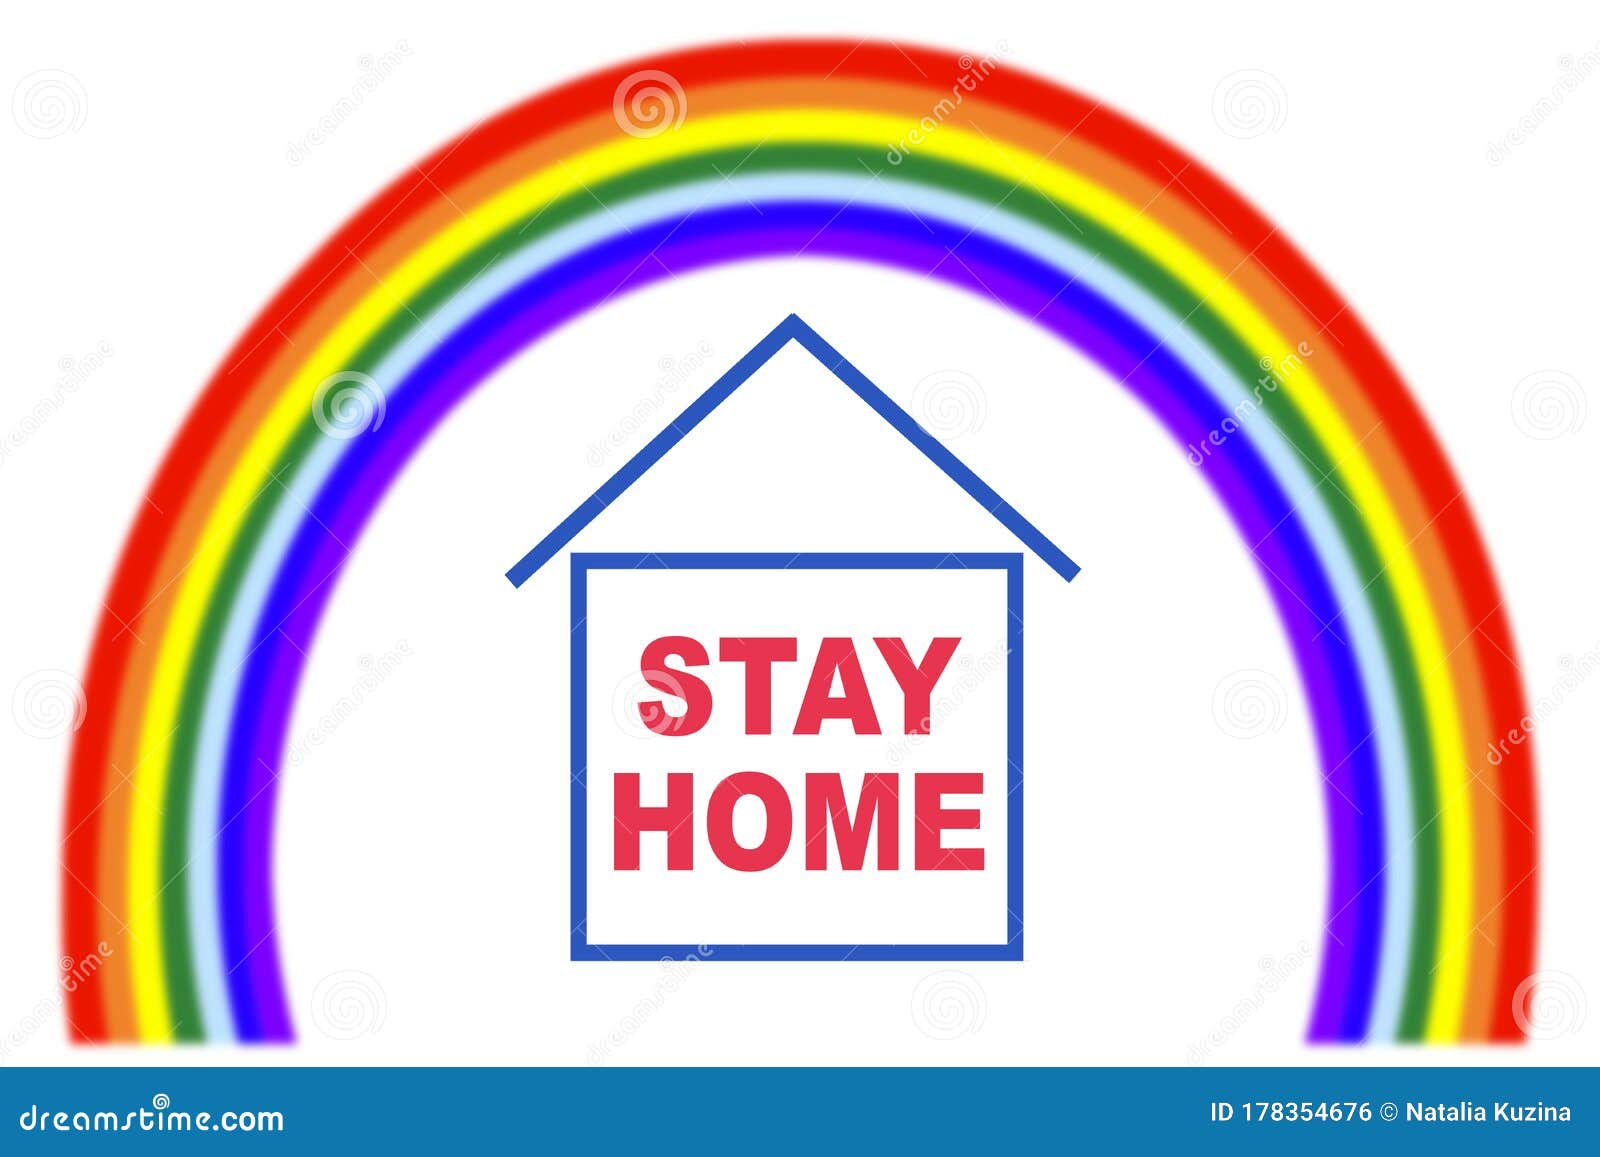 Rainbow Above House During Covid-19. Quarantine At Home. Stay At ...